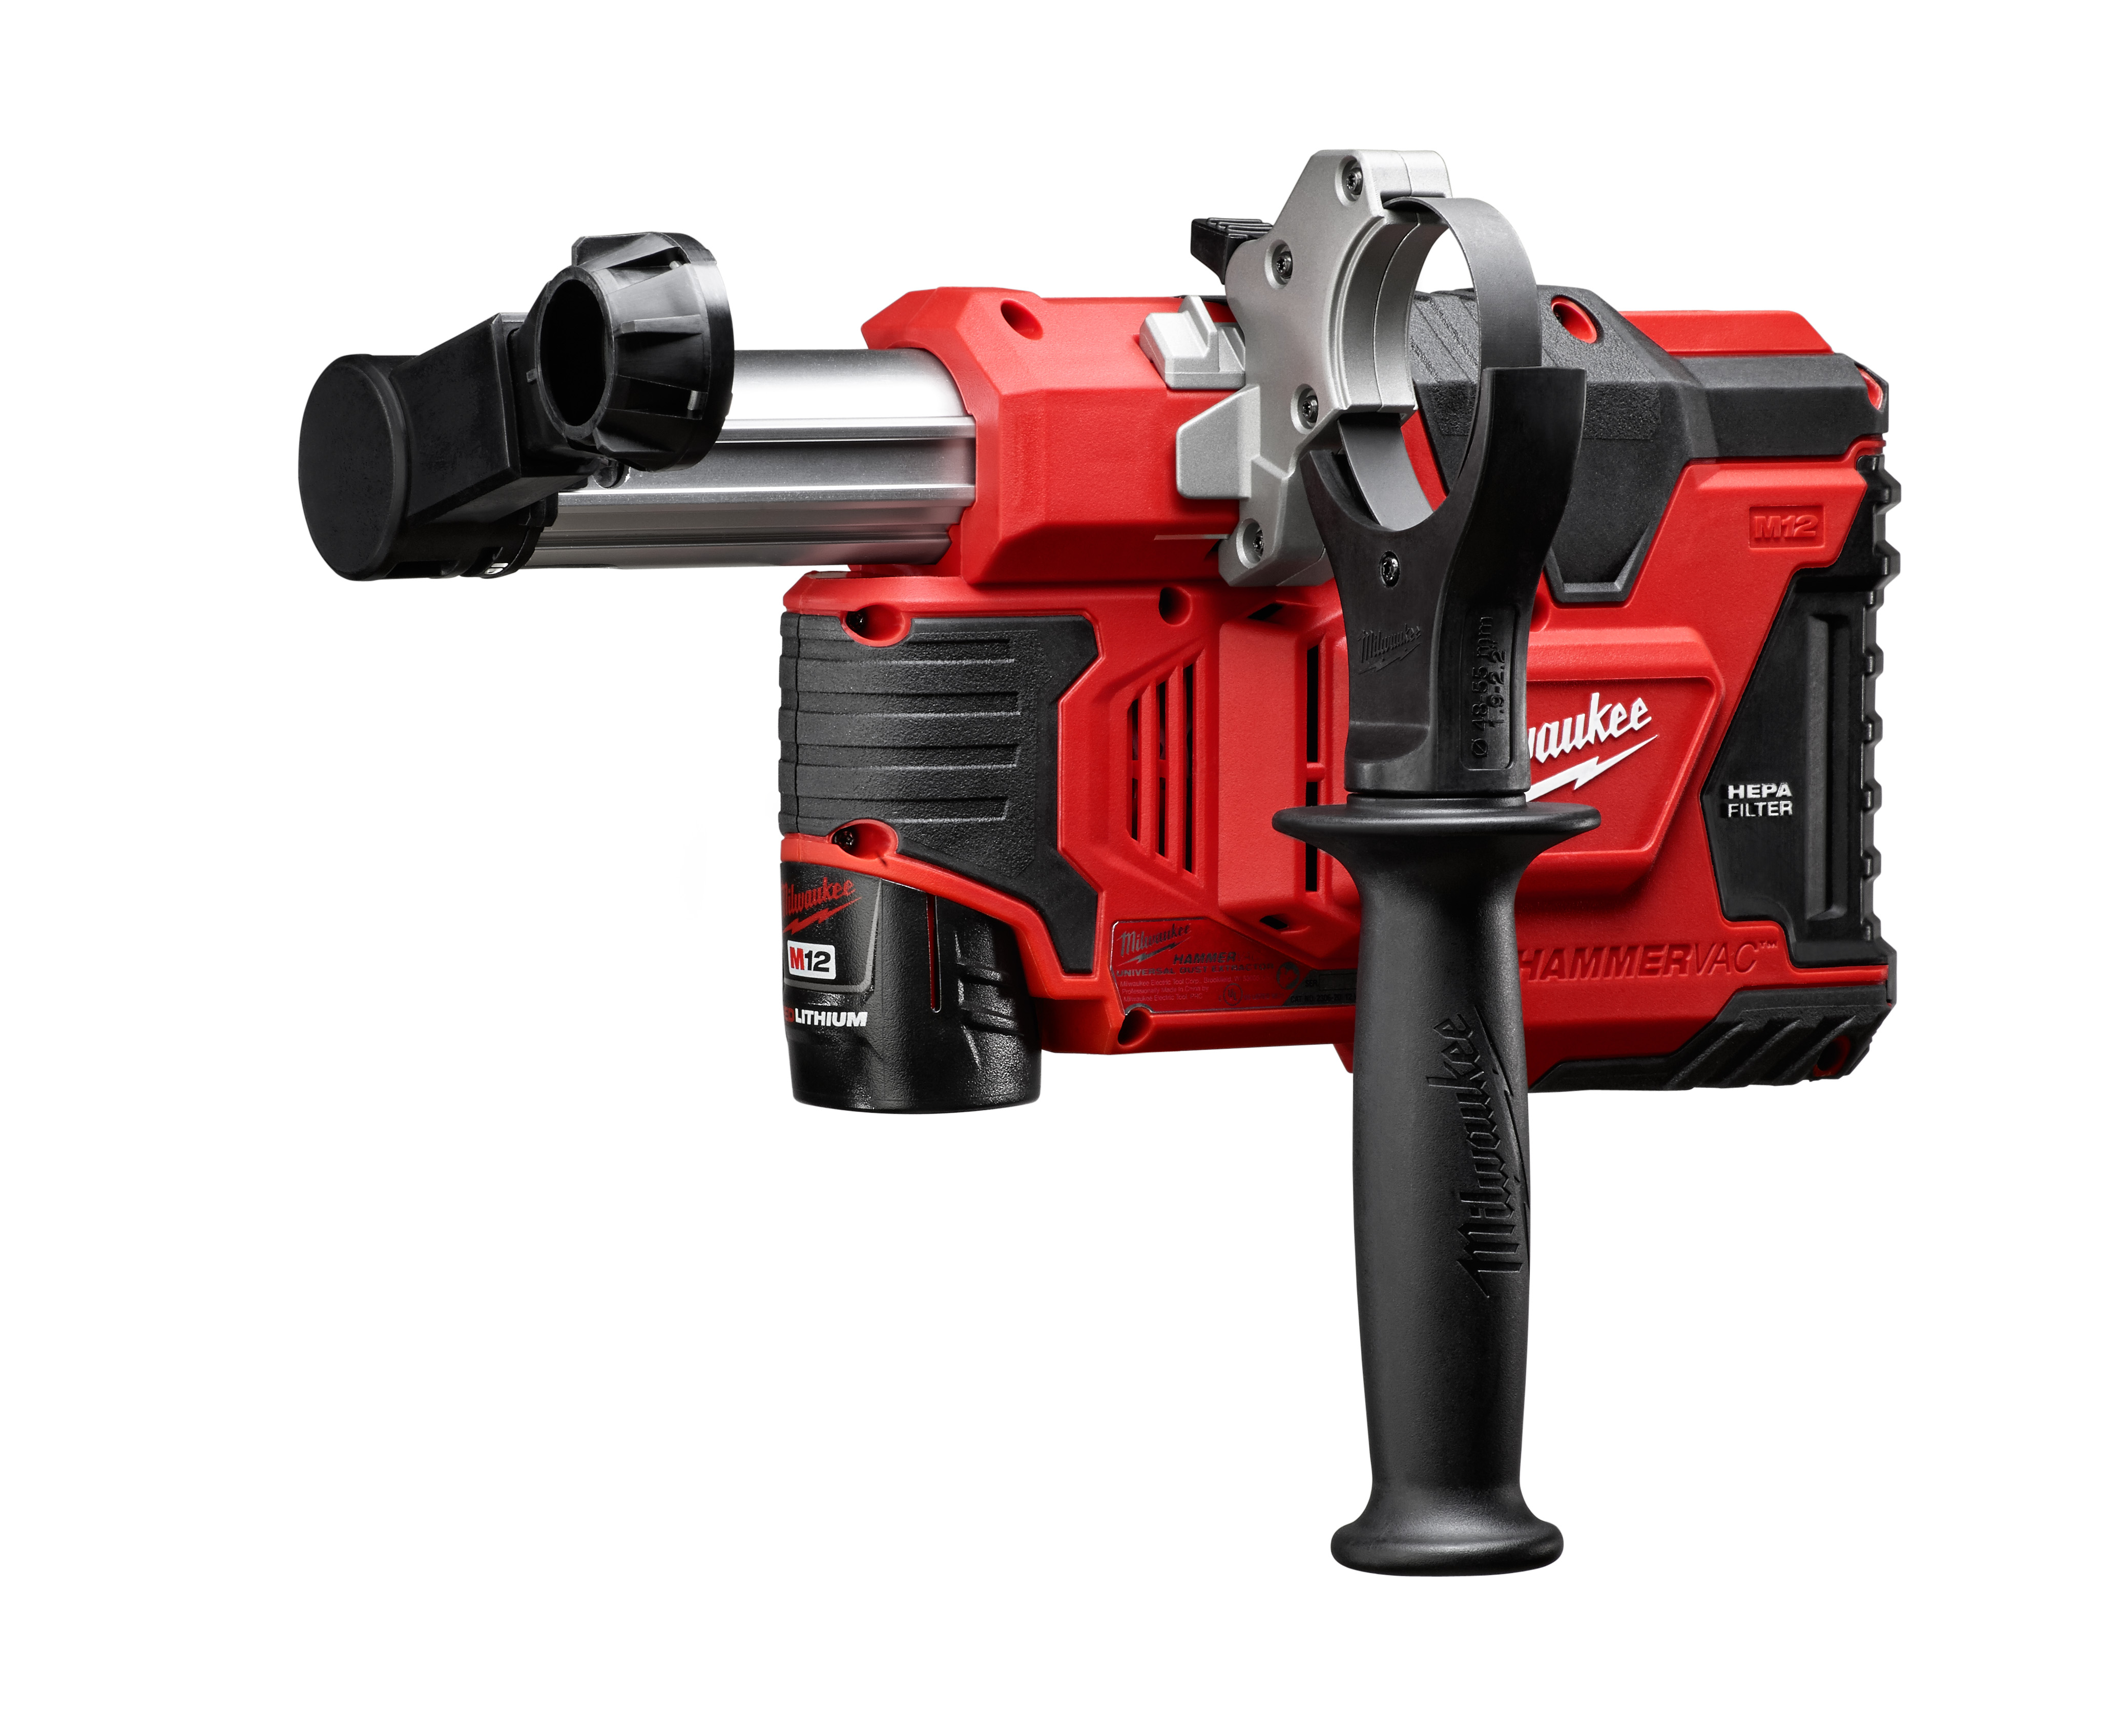 2306-22 045242297696 The only universal tool of its kind on the market, the cordless Milwaukee® M12™ HAMMERVAC™ Universal Dust Extractor Kit delivers HEPA-standard debris filtration at the lowest cost of ownership. The HAMMERVAC’s universal handle system is compatible with major brands of SDS Plus rotary hammers and AC/DC hammer drills, so users can drill safely into concrete and masonry without purchasing a new drill. It features a certified HEPA filter that is replaced independently of the dust box, enabling users to maintain powerful suction at a low cost. In auto-on mode, the extractor turns itself on and off as you work for maximum productivity. Powered by an M12™ Compact REDLITHIUM™ Battery, the HAMMERVAC provides filtration for up to 160 holes on a single charge. For even longer runtime, utilize the M12 XC High-Capacity REDLITHIUM battery (sold separately). The kit includes an M12 Compact REDLITHIUM Battery and Charger, a HEPA filter, nozzle, 3 side-handle clamping collar assemblies and a carrying case. Bullets: Powerful dust extraction: Reduces the potential for silica dust inhalation by user Universal handle system: Compatible with major brands of SDS Plus rotary hammers and AC/DC hammer drills Replaceable certified HEPA filter: Provides high-quality debris filtration at lowest cost of ownership. 97696